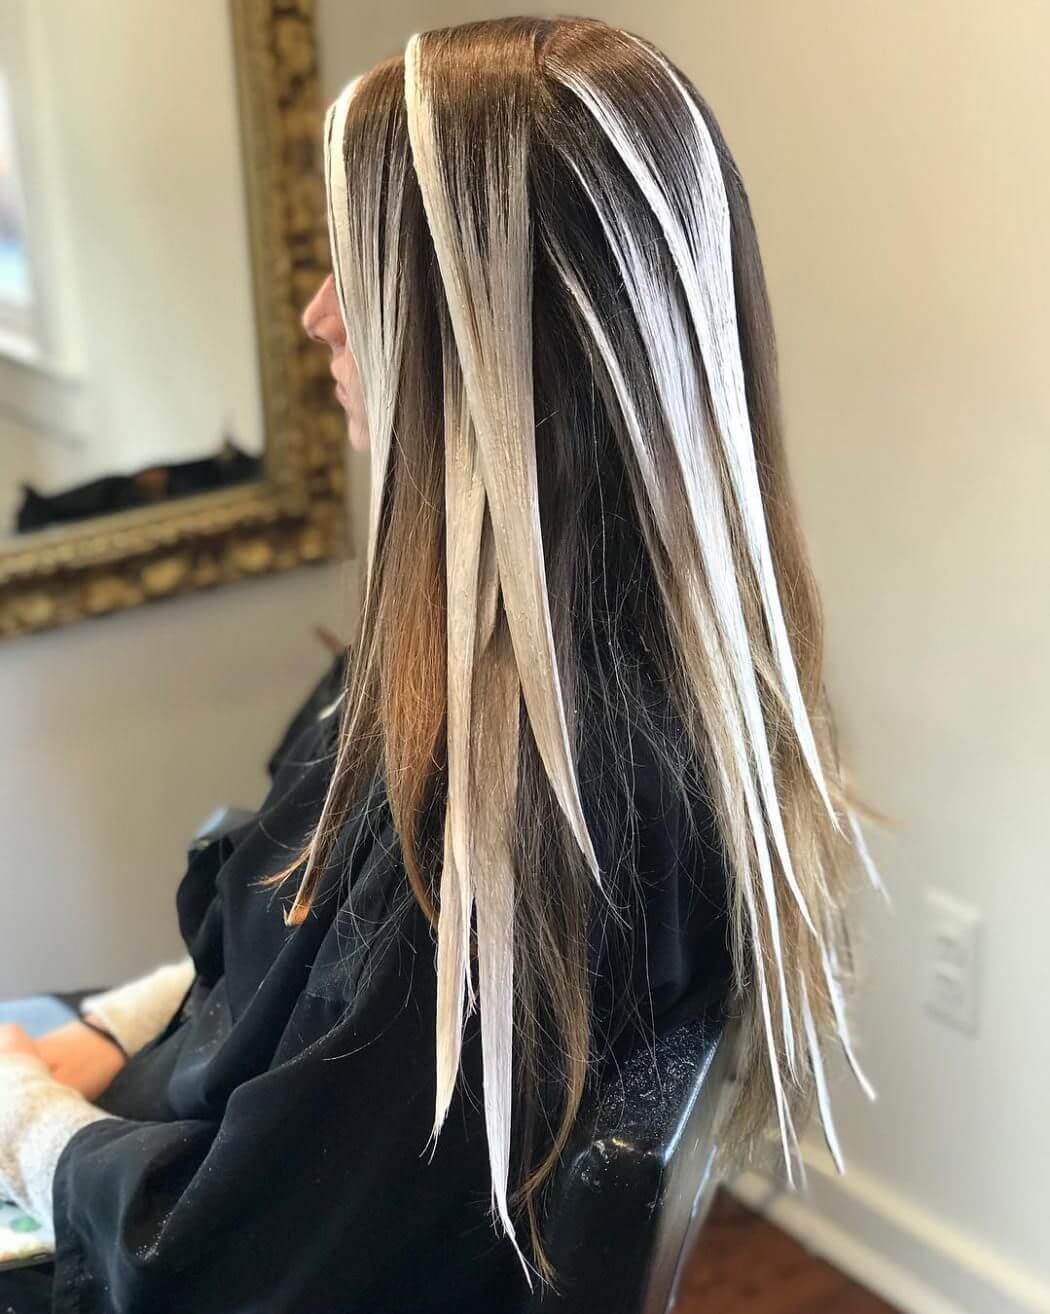 Coat Highlight on hair by balayage highlight technique